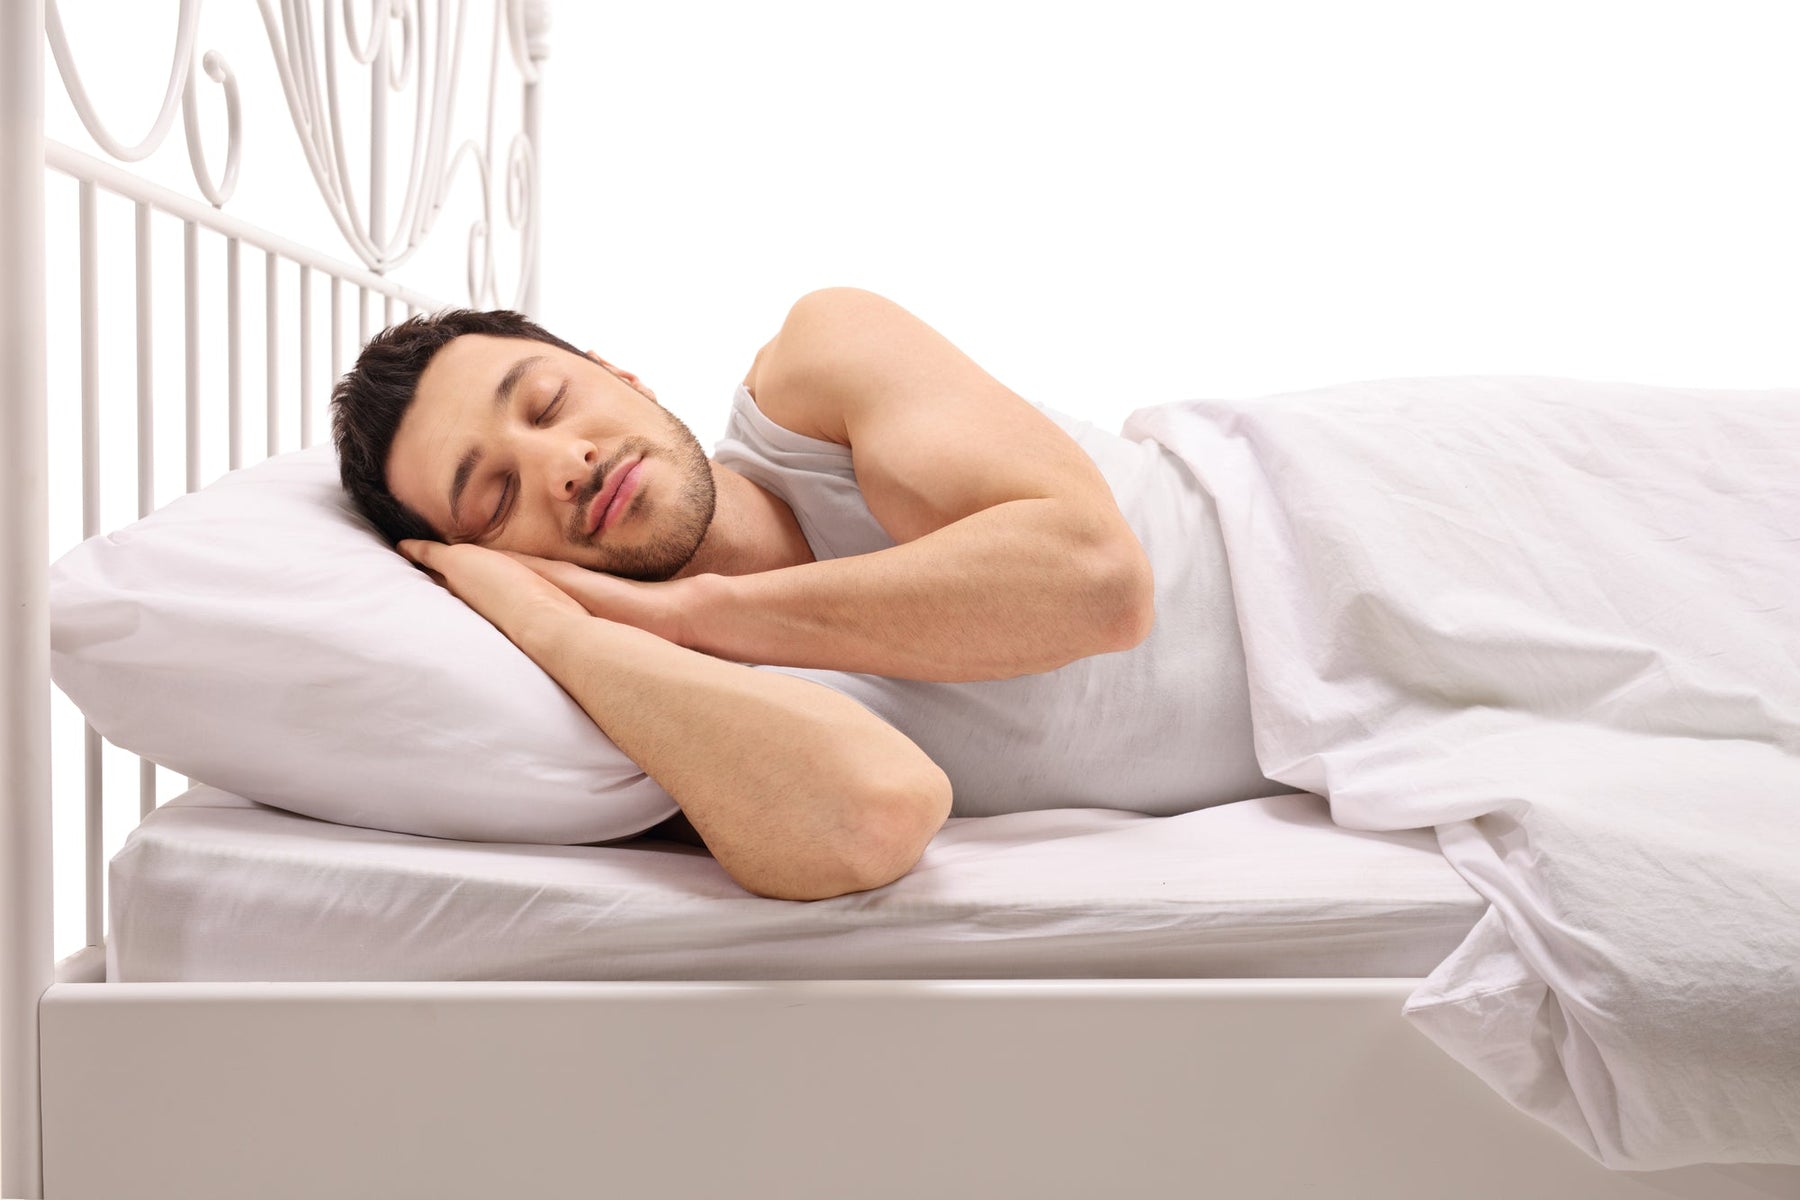 How to Shop for an Adjustable Mattress